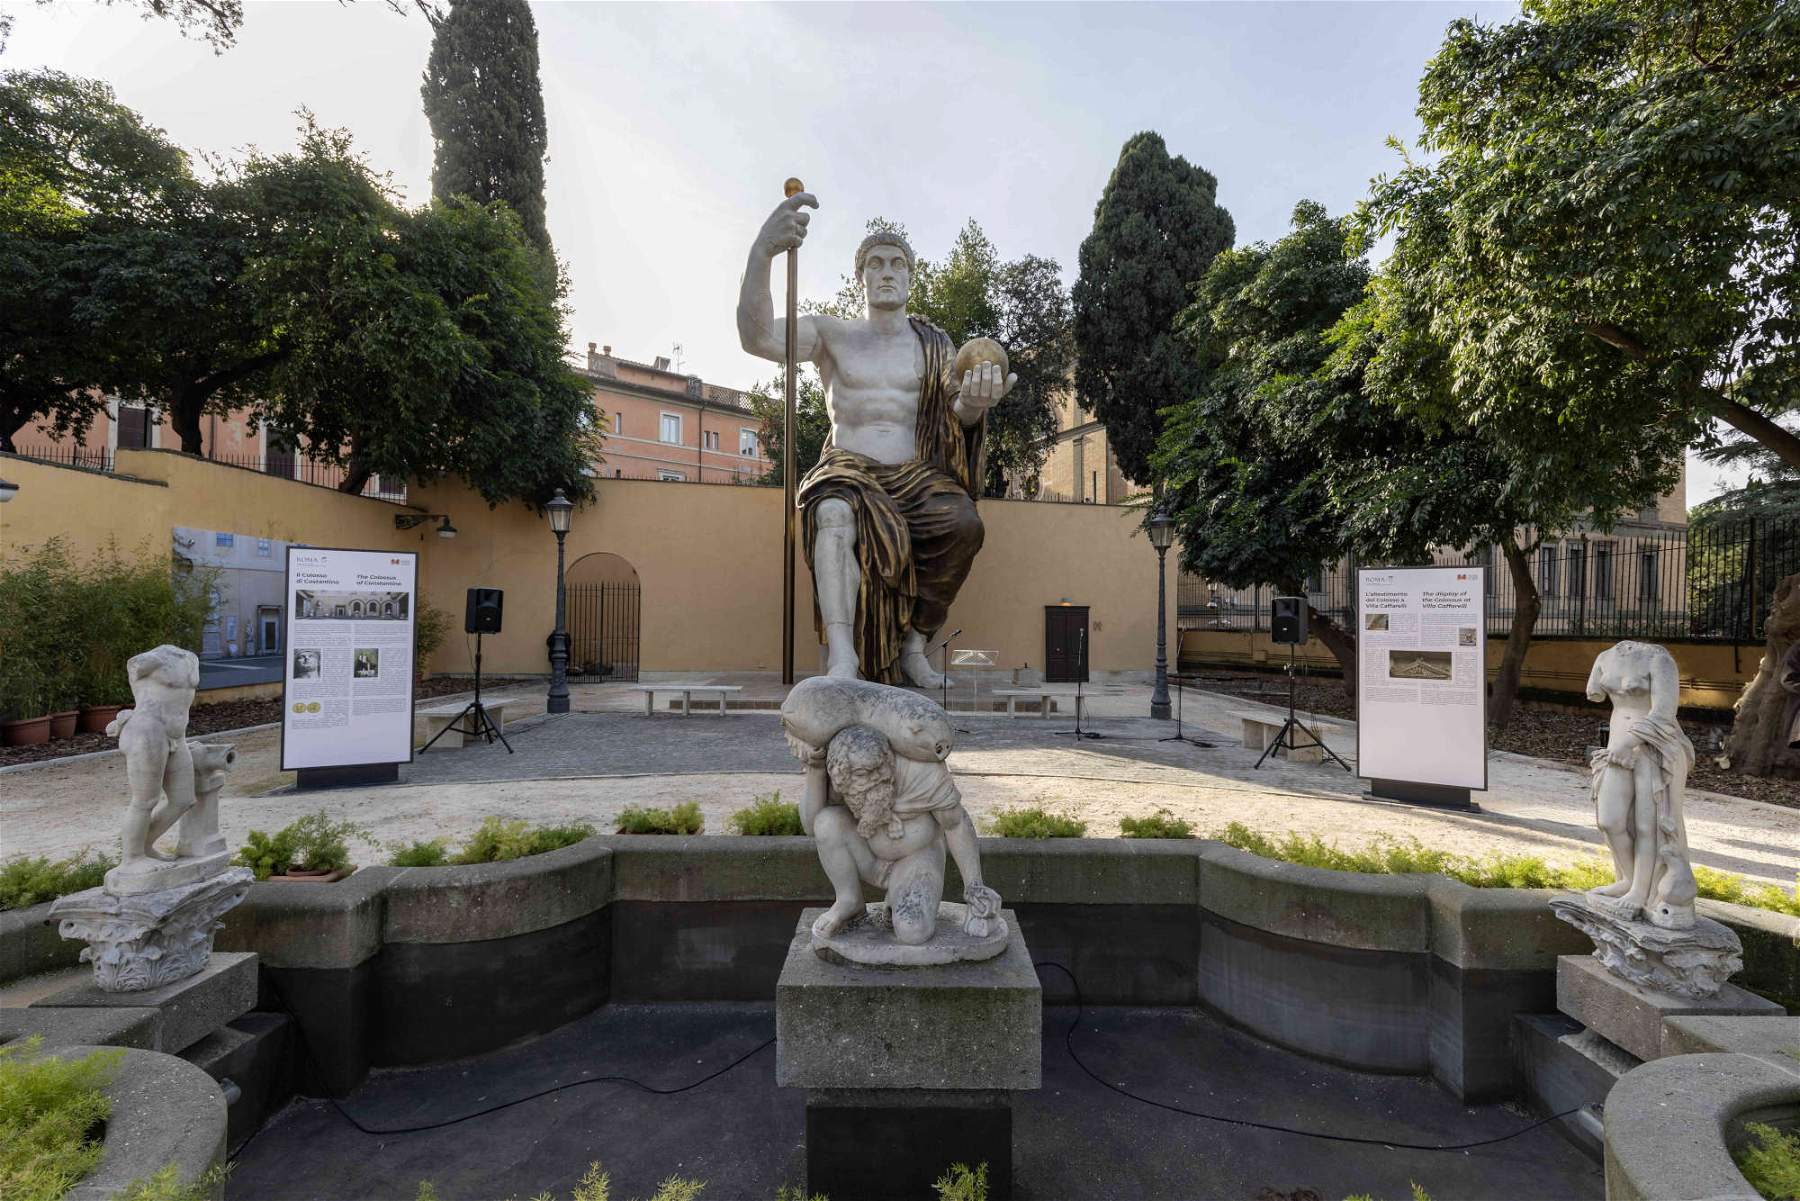 Rome, reconstruction of the Colossus of Constantine unveiled. Photos